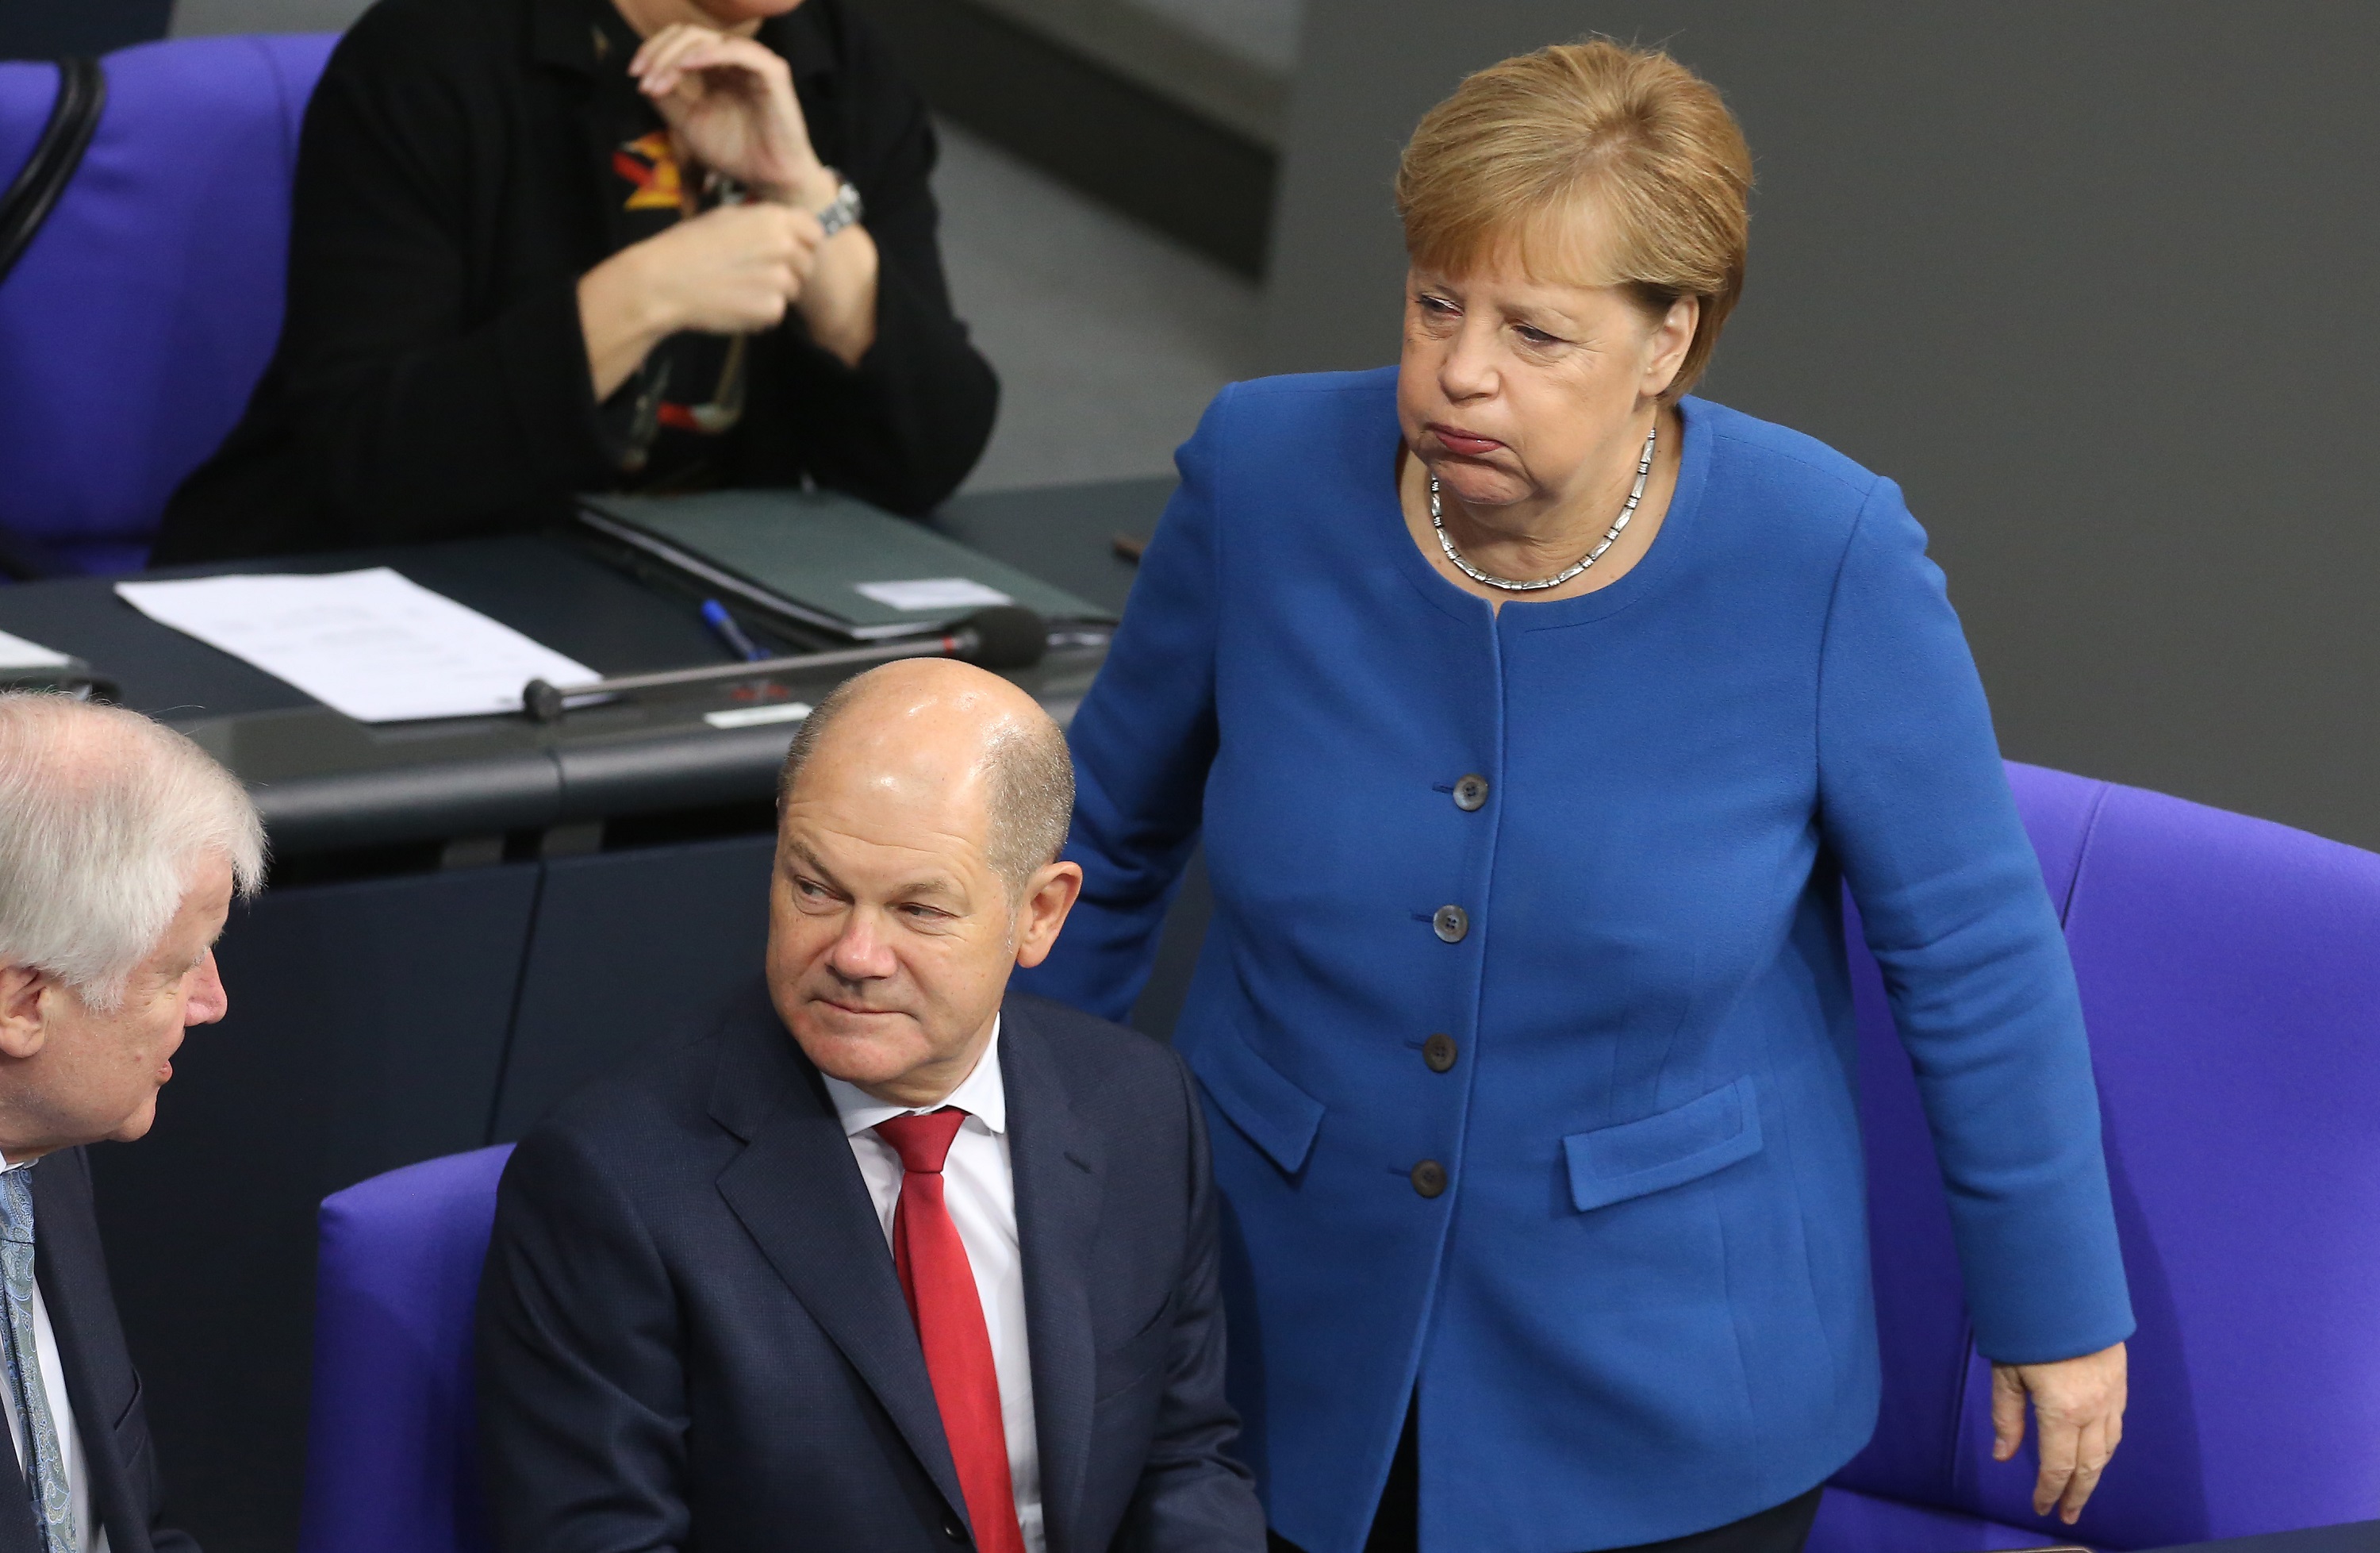 Angela Merkel S Political Crisis Will Unfold In Slow Motion Bloomberg